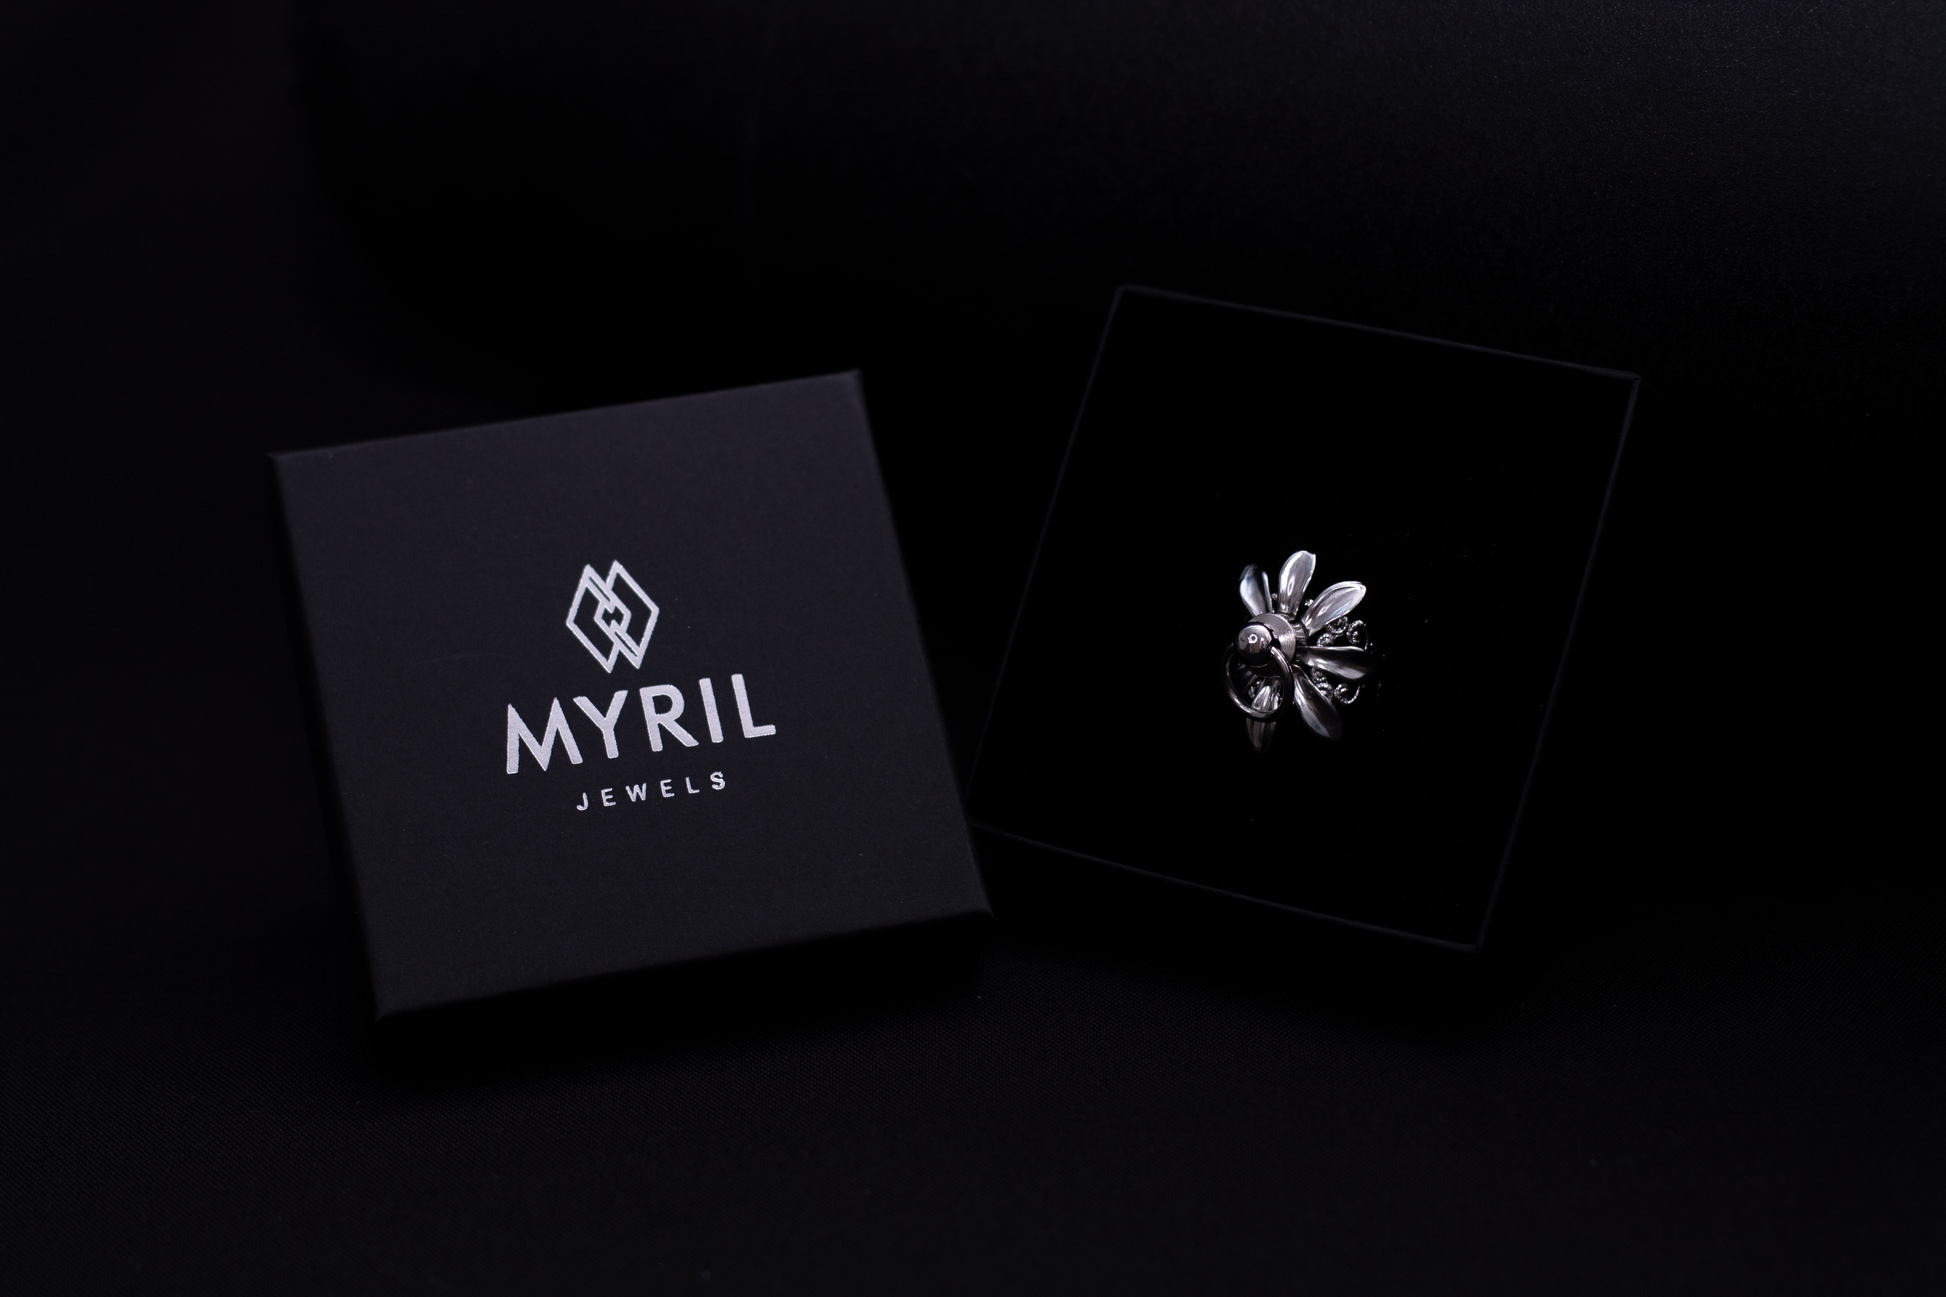 A sleek Myril Jewels presentation box with the brand's logo, accompanied by a polished Flower ring, exemplifies the luxurious dark-avantgarde style. Perfect for gothic and alternative fashion enthusiasts, this image highlights the brand's commitment to creating sophisticated, handcrafted Italian jewelry